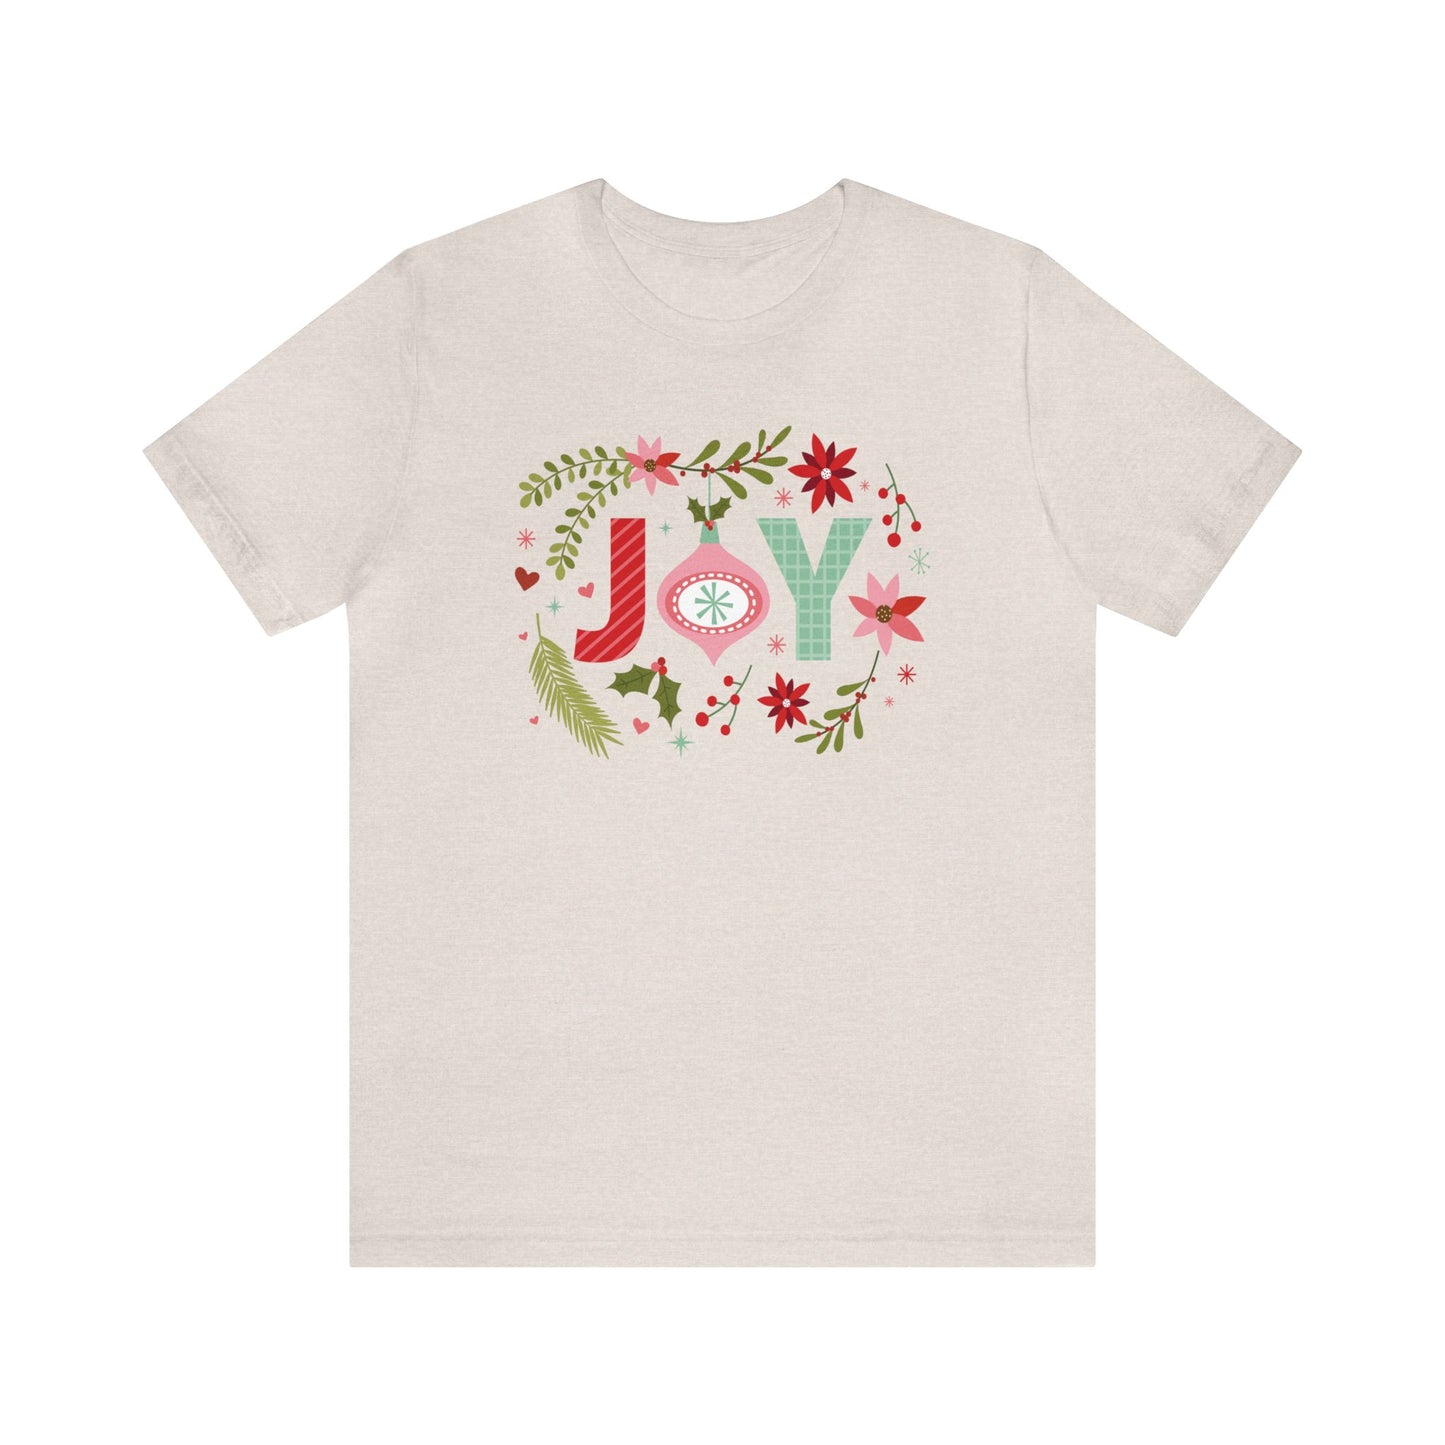 Joy T-Shirt For Christmas T Shirt For Holiday Cheer TShirt For Gift For Her